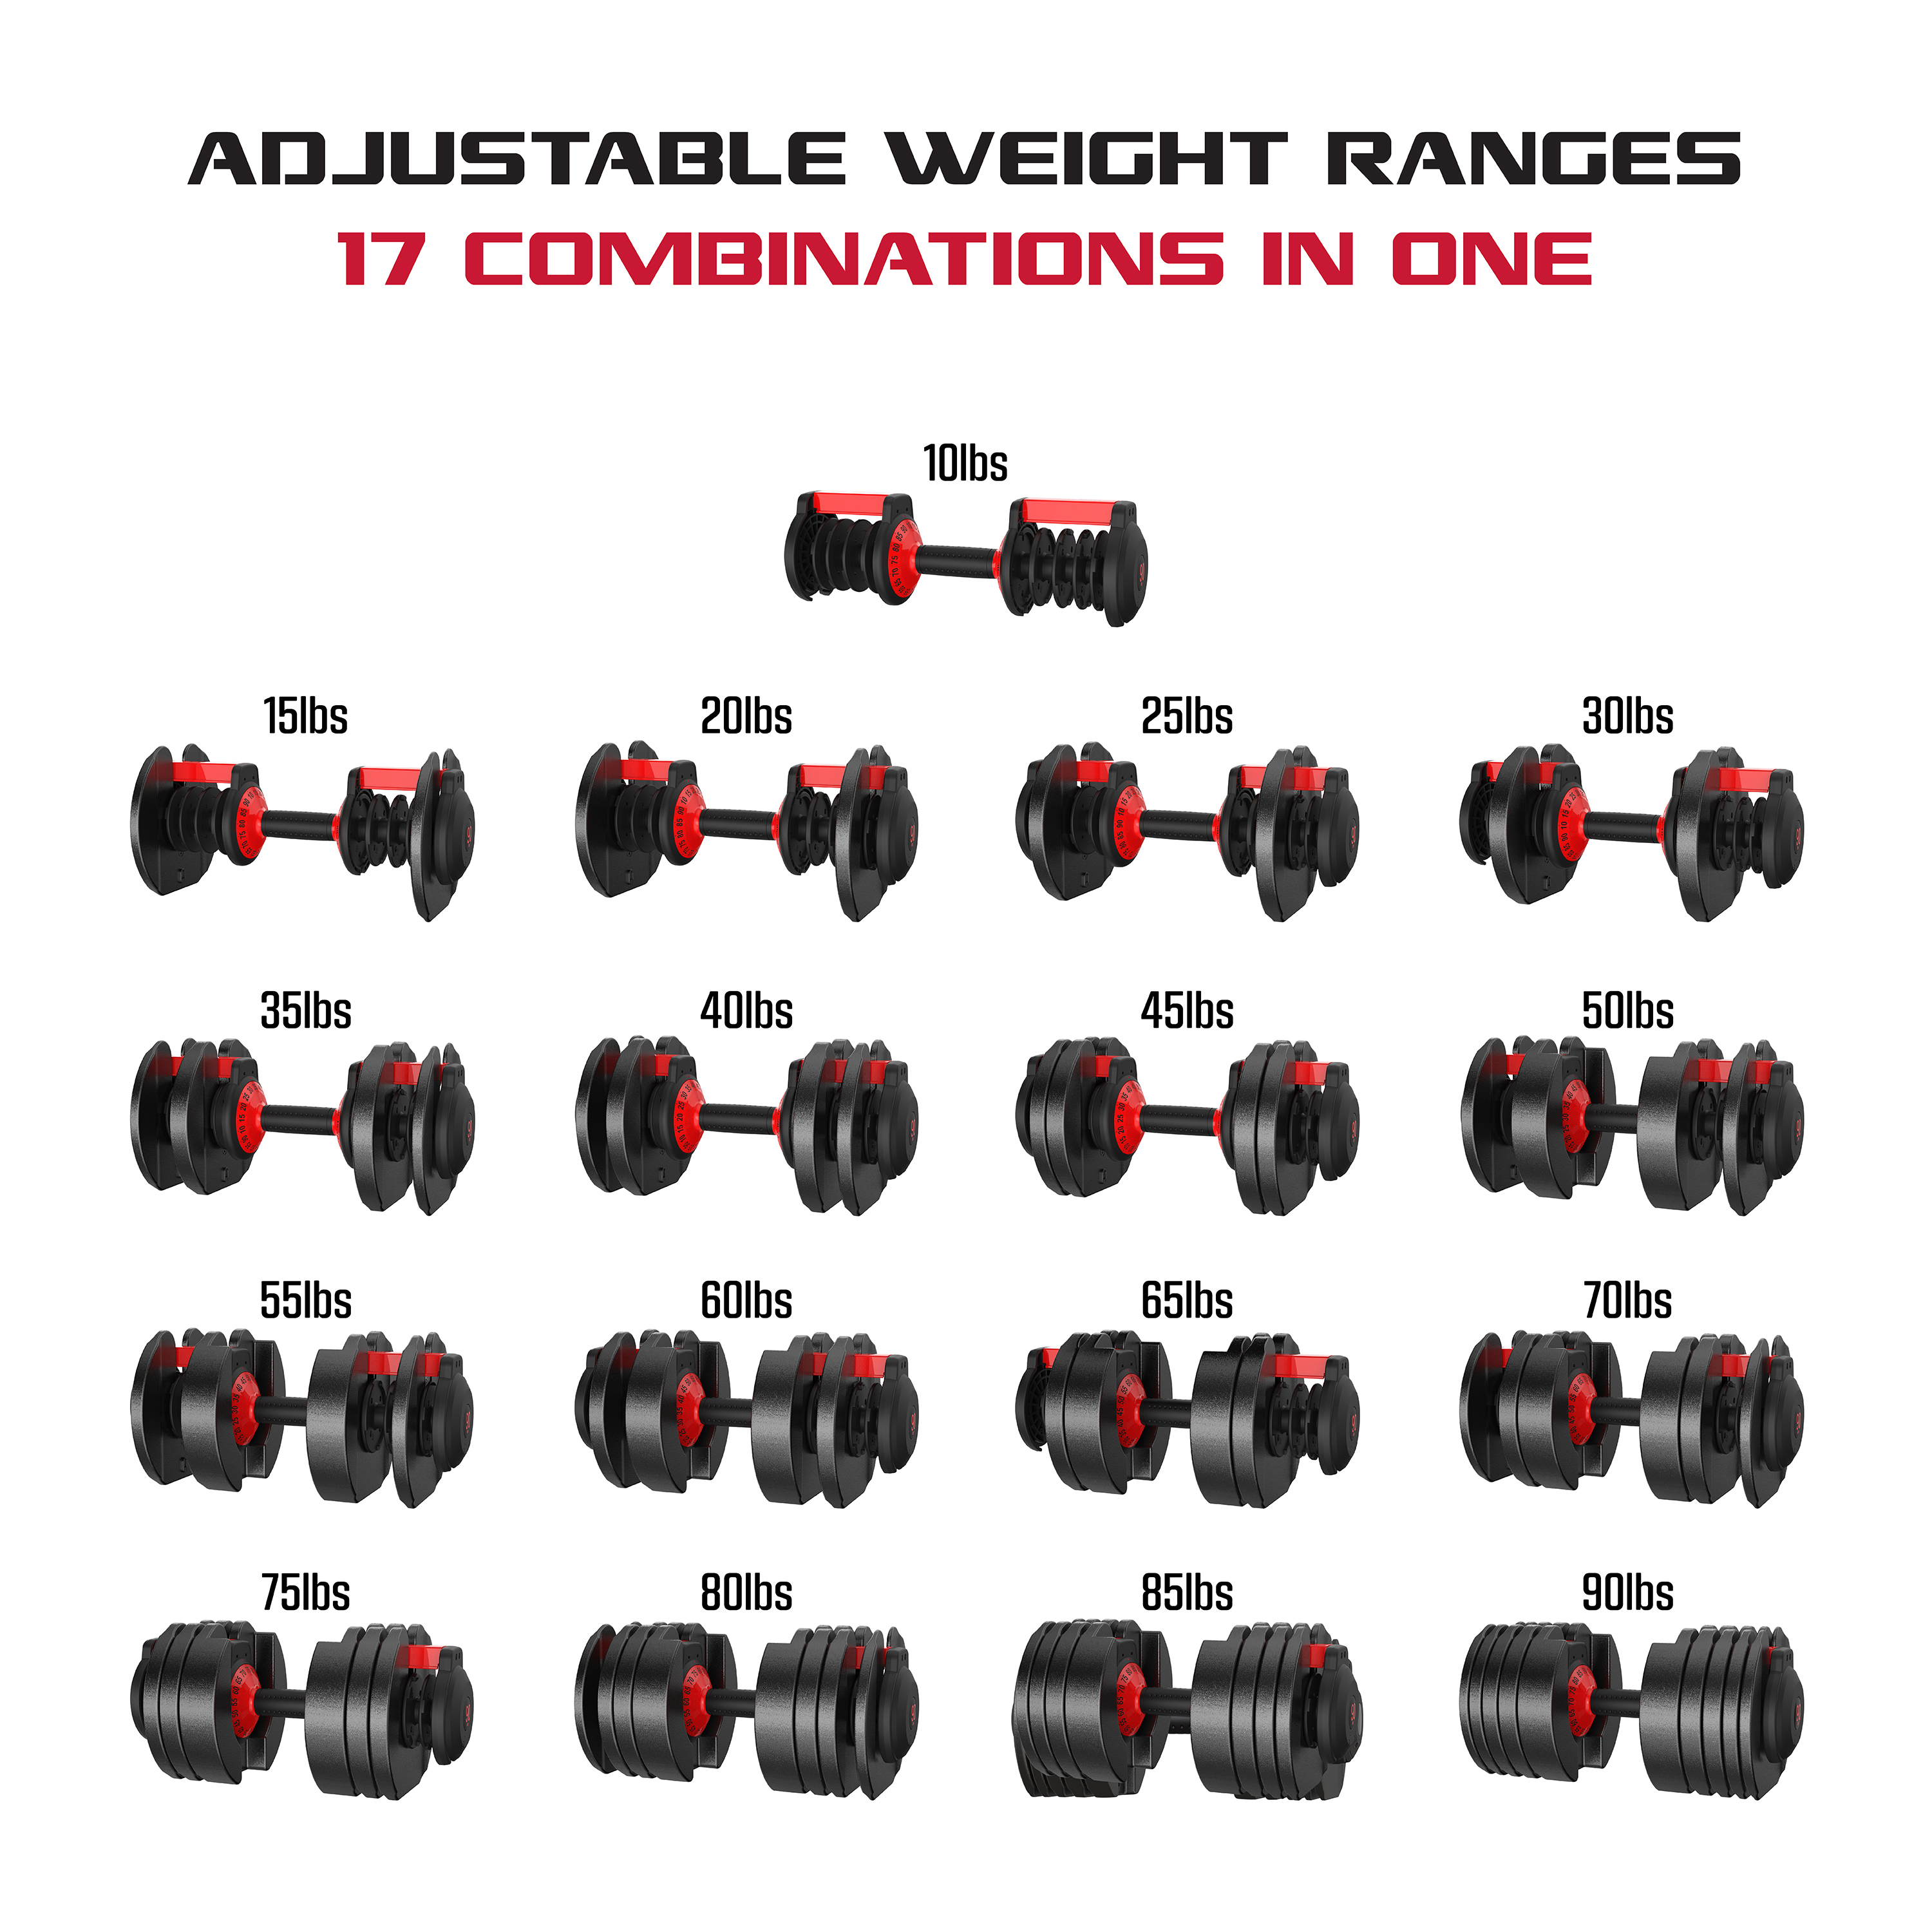 FitRx SmartBell XL, Quick-Select Adjustable Dumbbell, 10-90 lbs. Weight, Black, Single - image 3 of 10